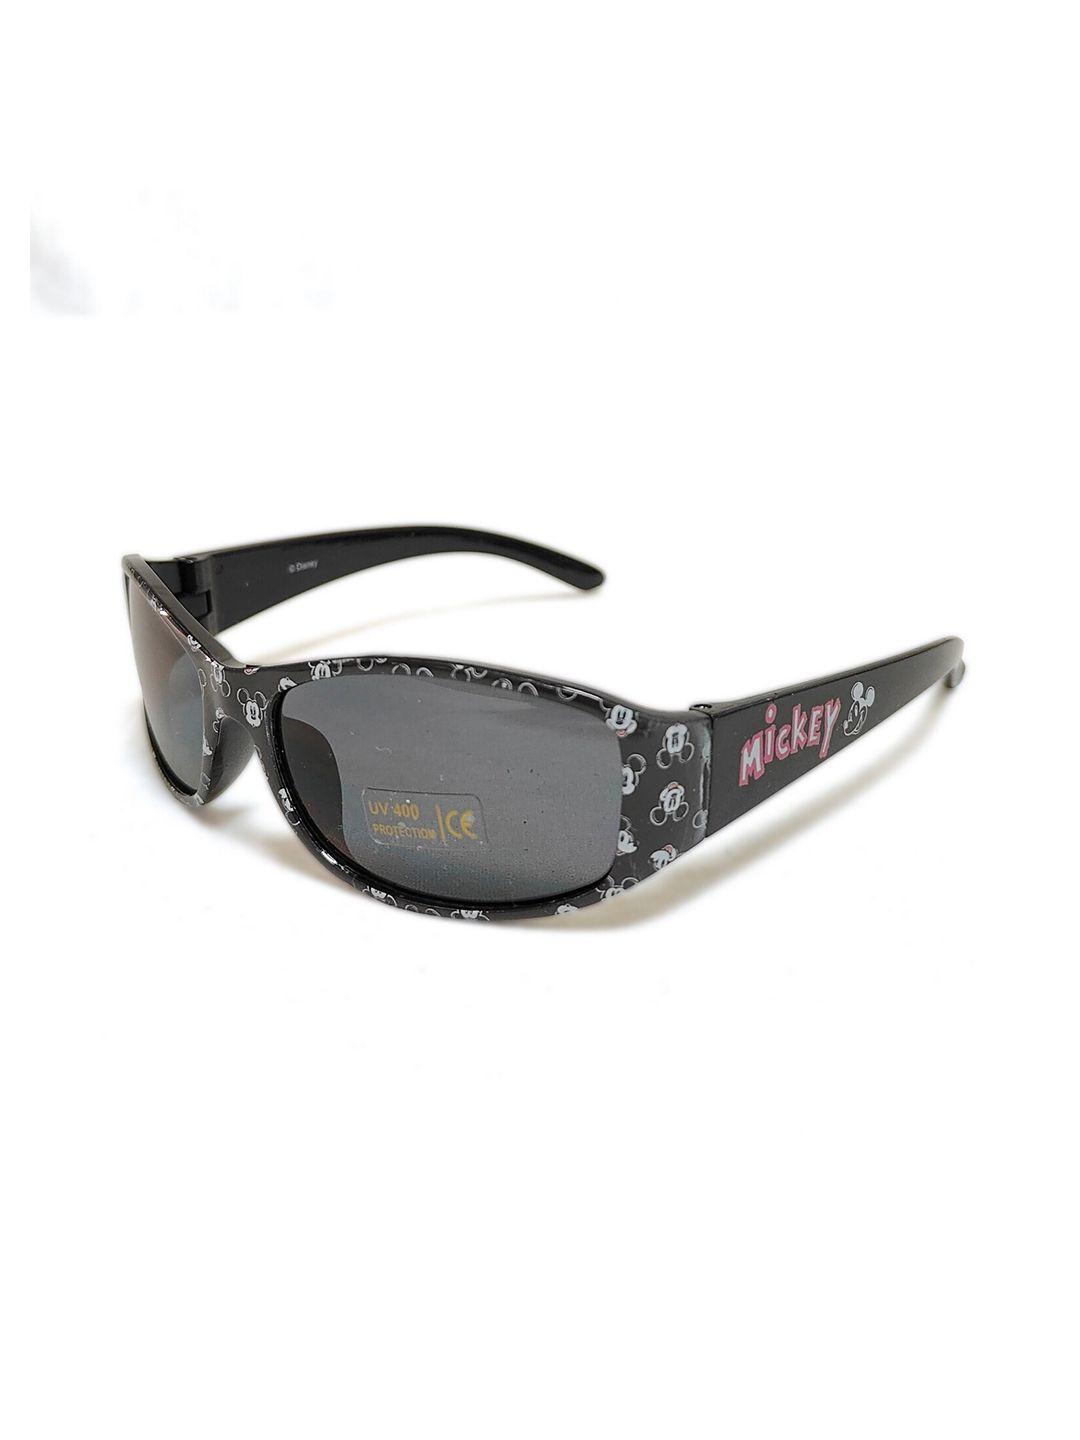 disney-boys-grey-lens-&-black-sports-sunglasses-with-polarised-and-uv-protected-lens